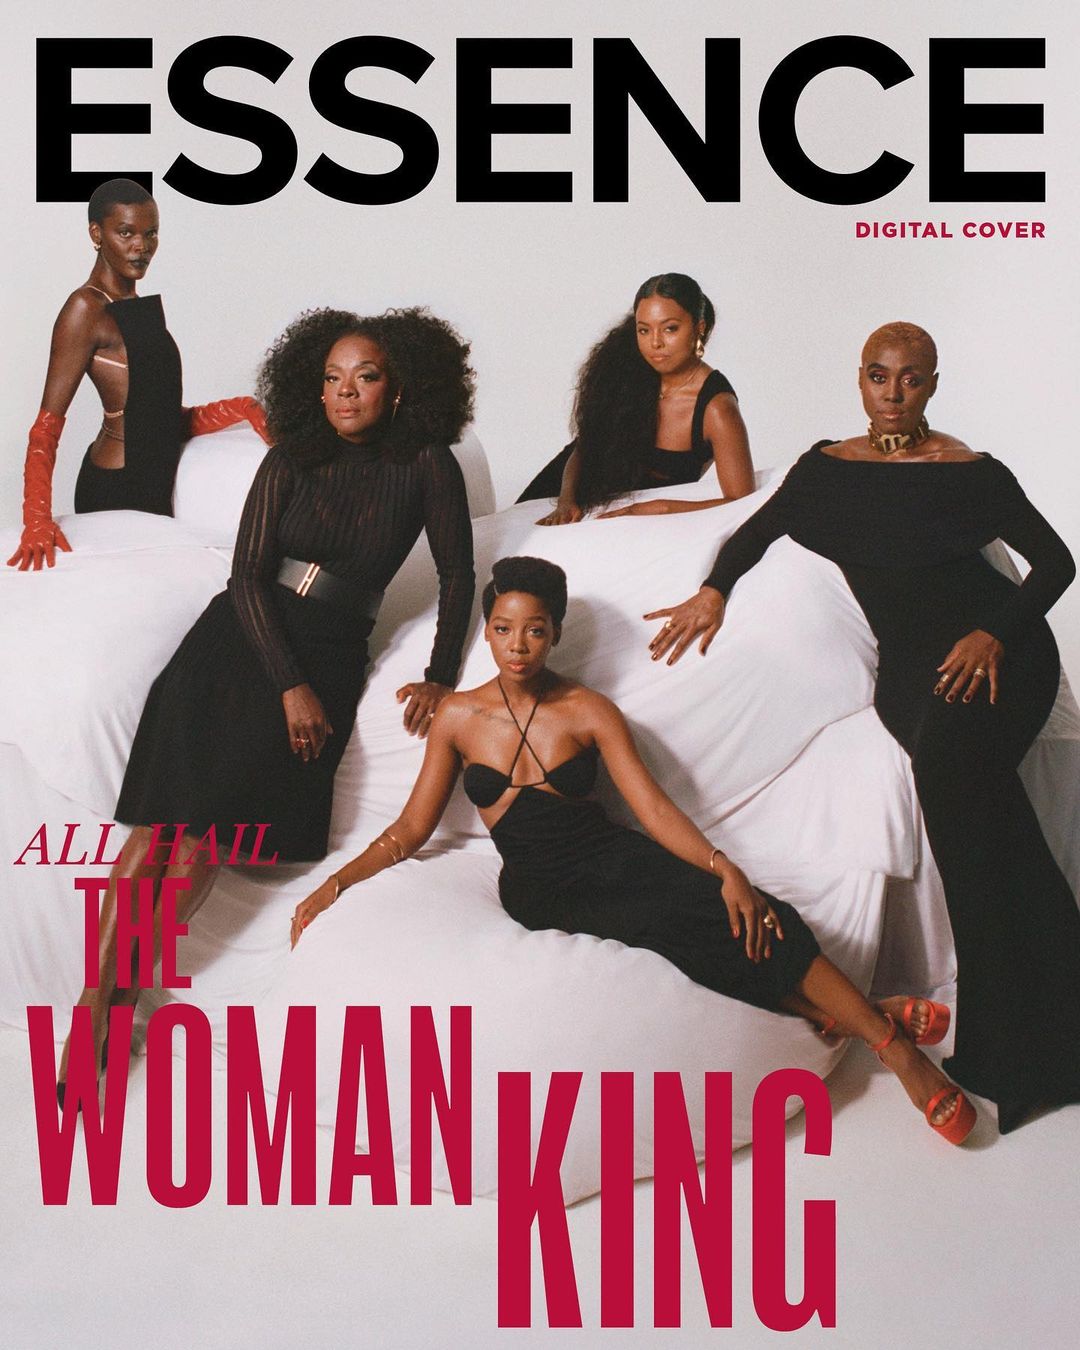 The Cast of The Woman King Celebrates Sisterhood as they Cover